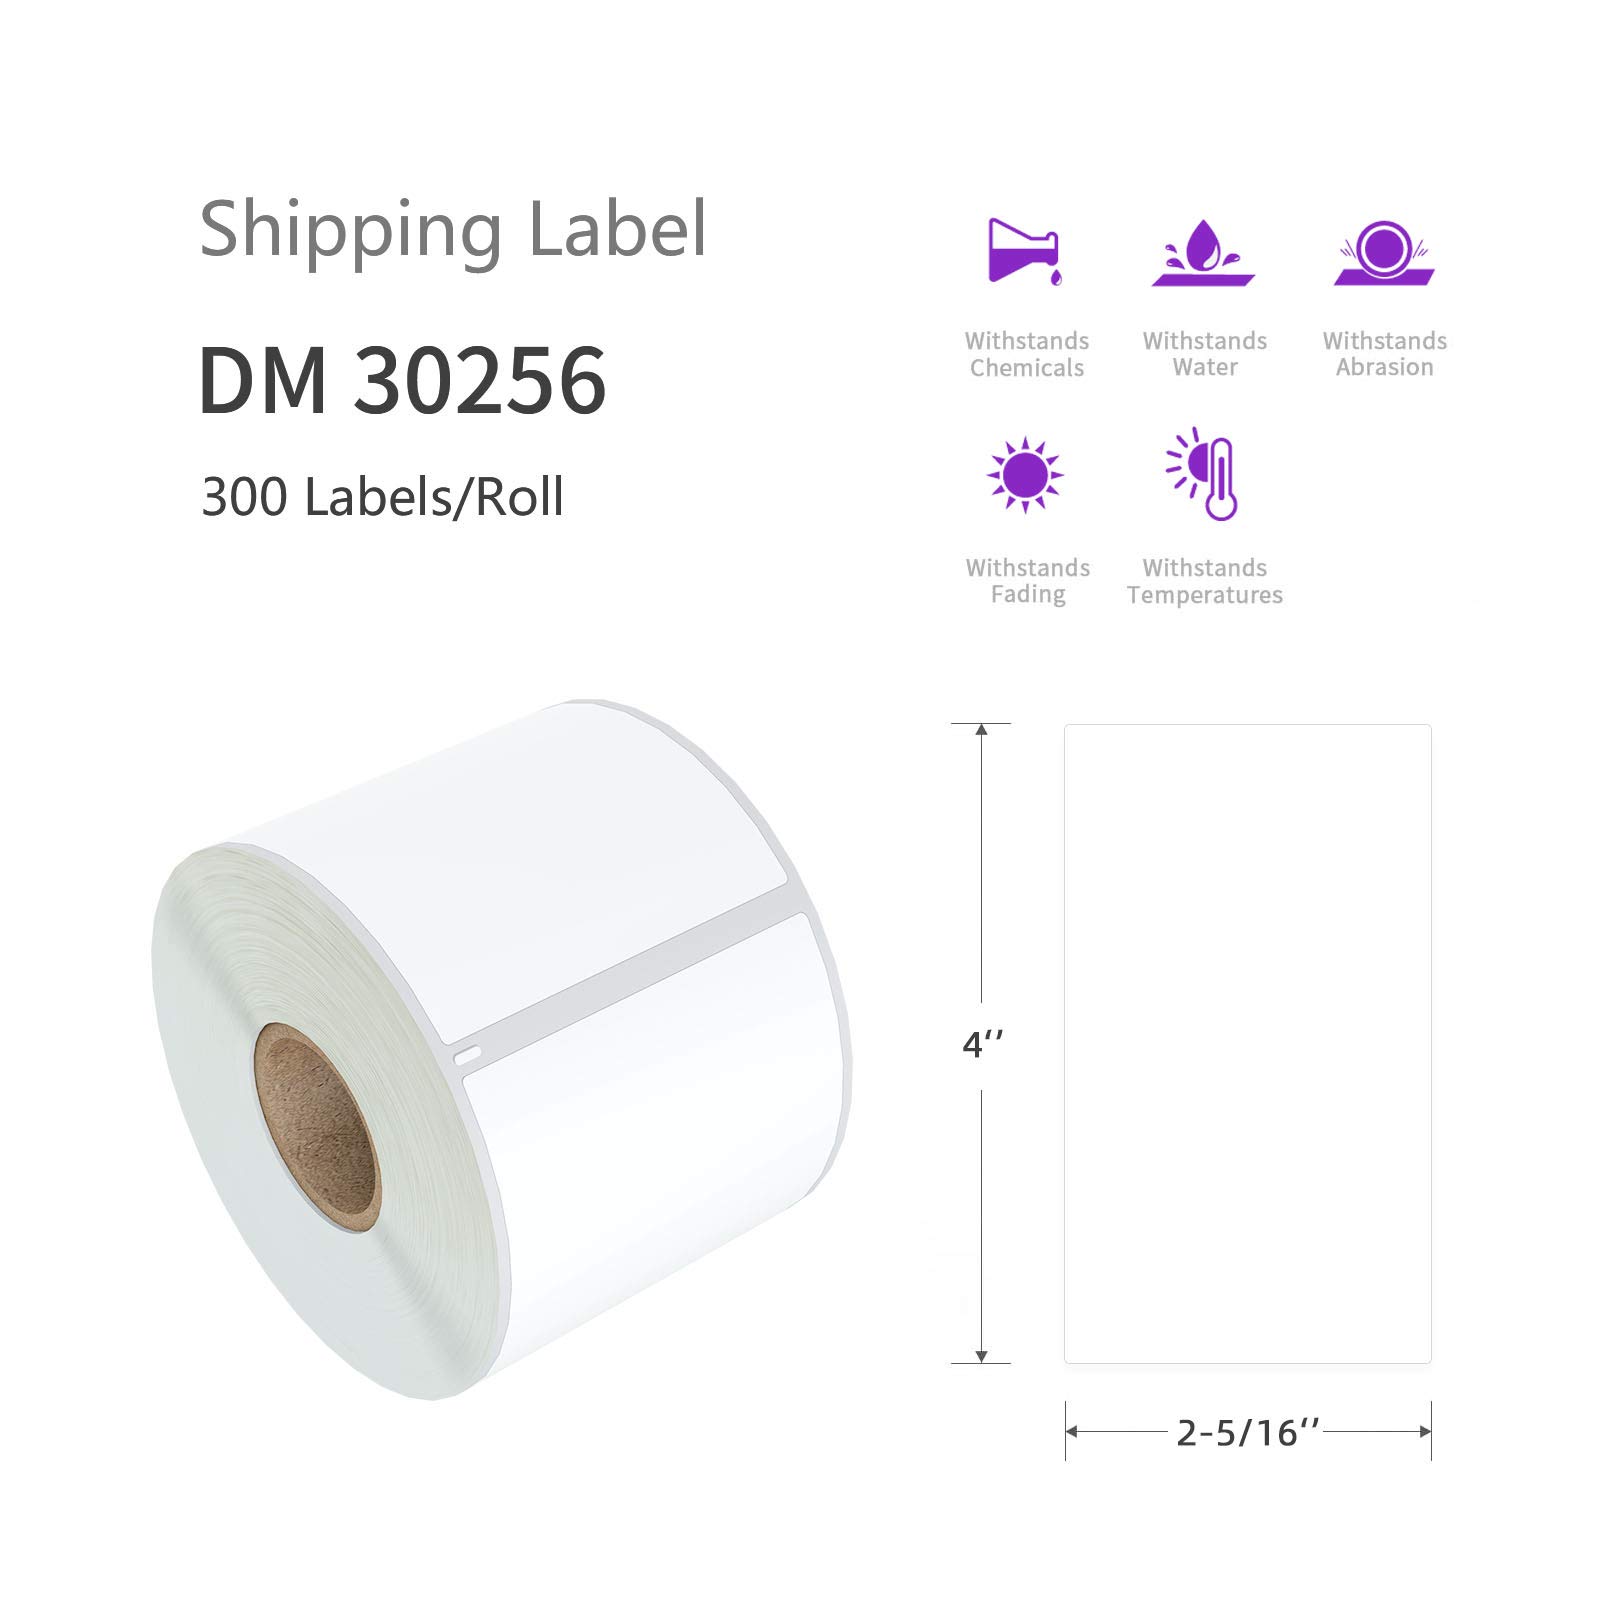 AveneMark 12 Rolls Compatible DYMO 30256 (2-5/16" x 4") Direct Thermal Labels Shipping Labels Compatible with Rollo, DYMO 4XL & Zebra Desktop Printers - 3600 Labels